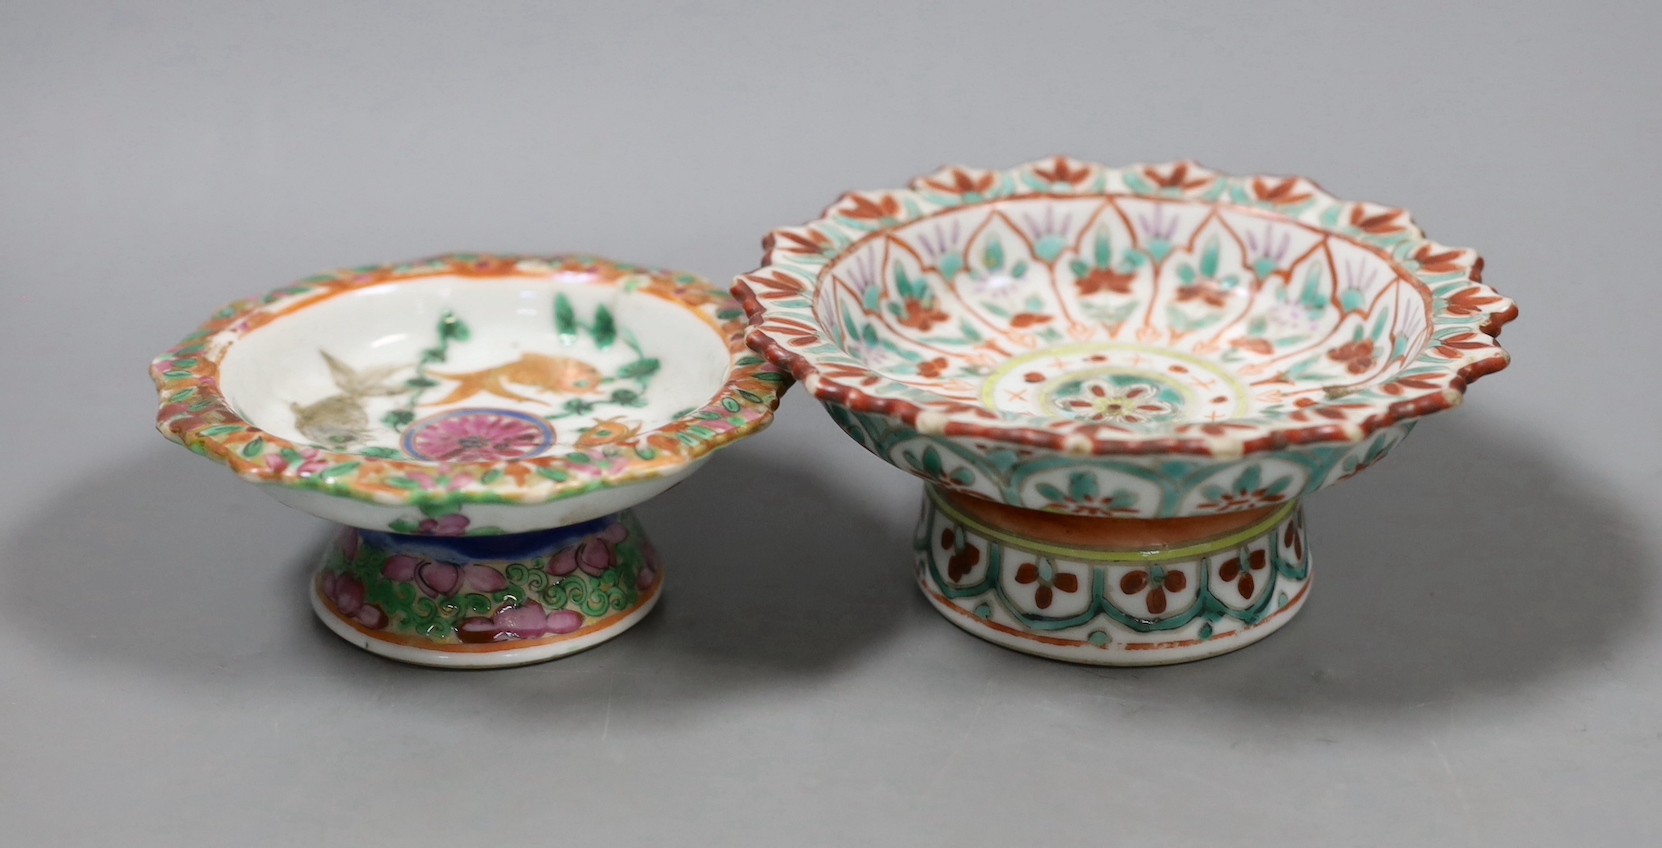 A Chinese Straits enamelled porcelain stem dish, together with a smaller footed koi famille rose stem dish, both late 19th/early 20th century, Largest 12cm diameter